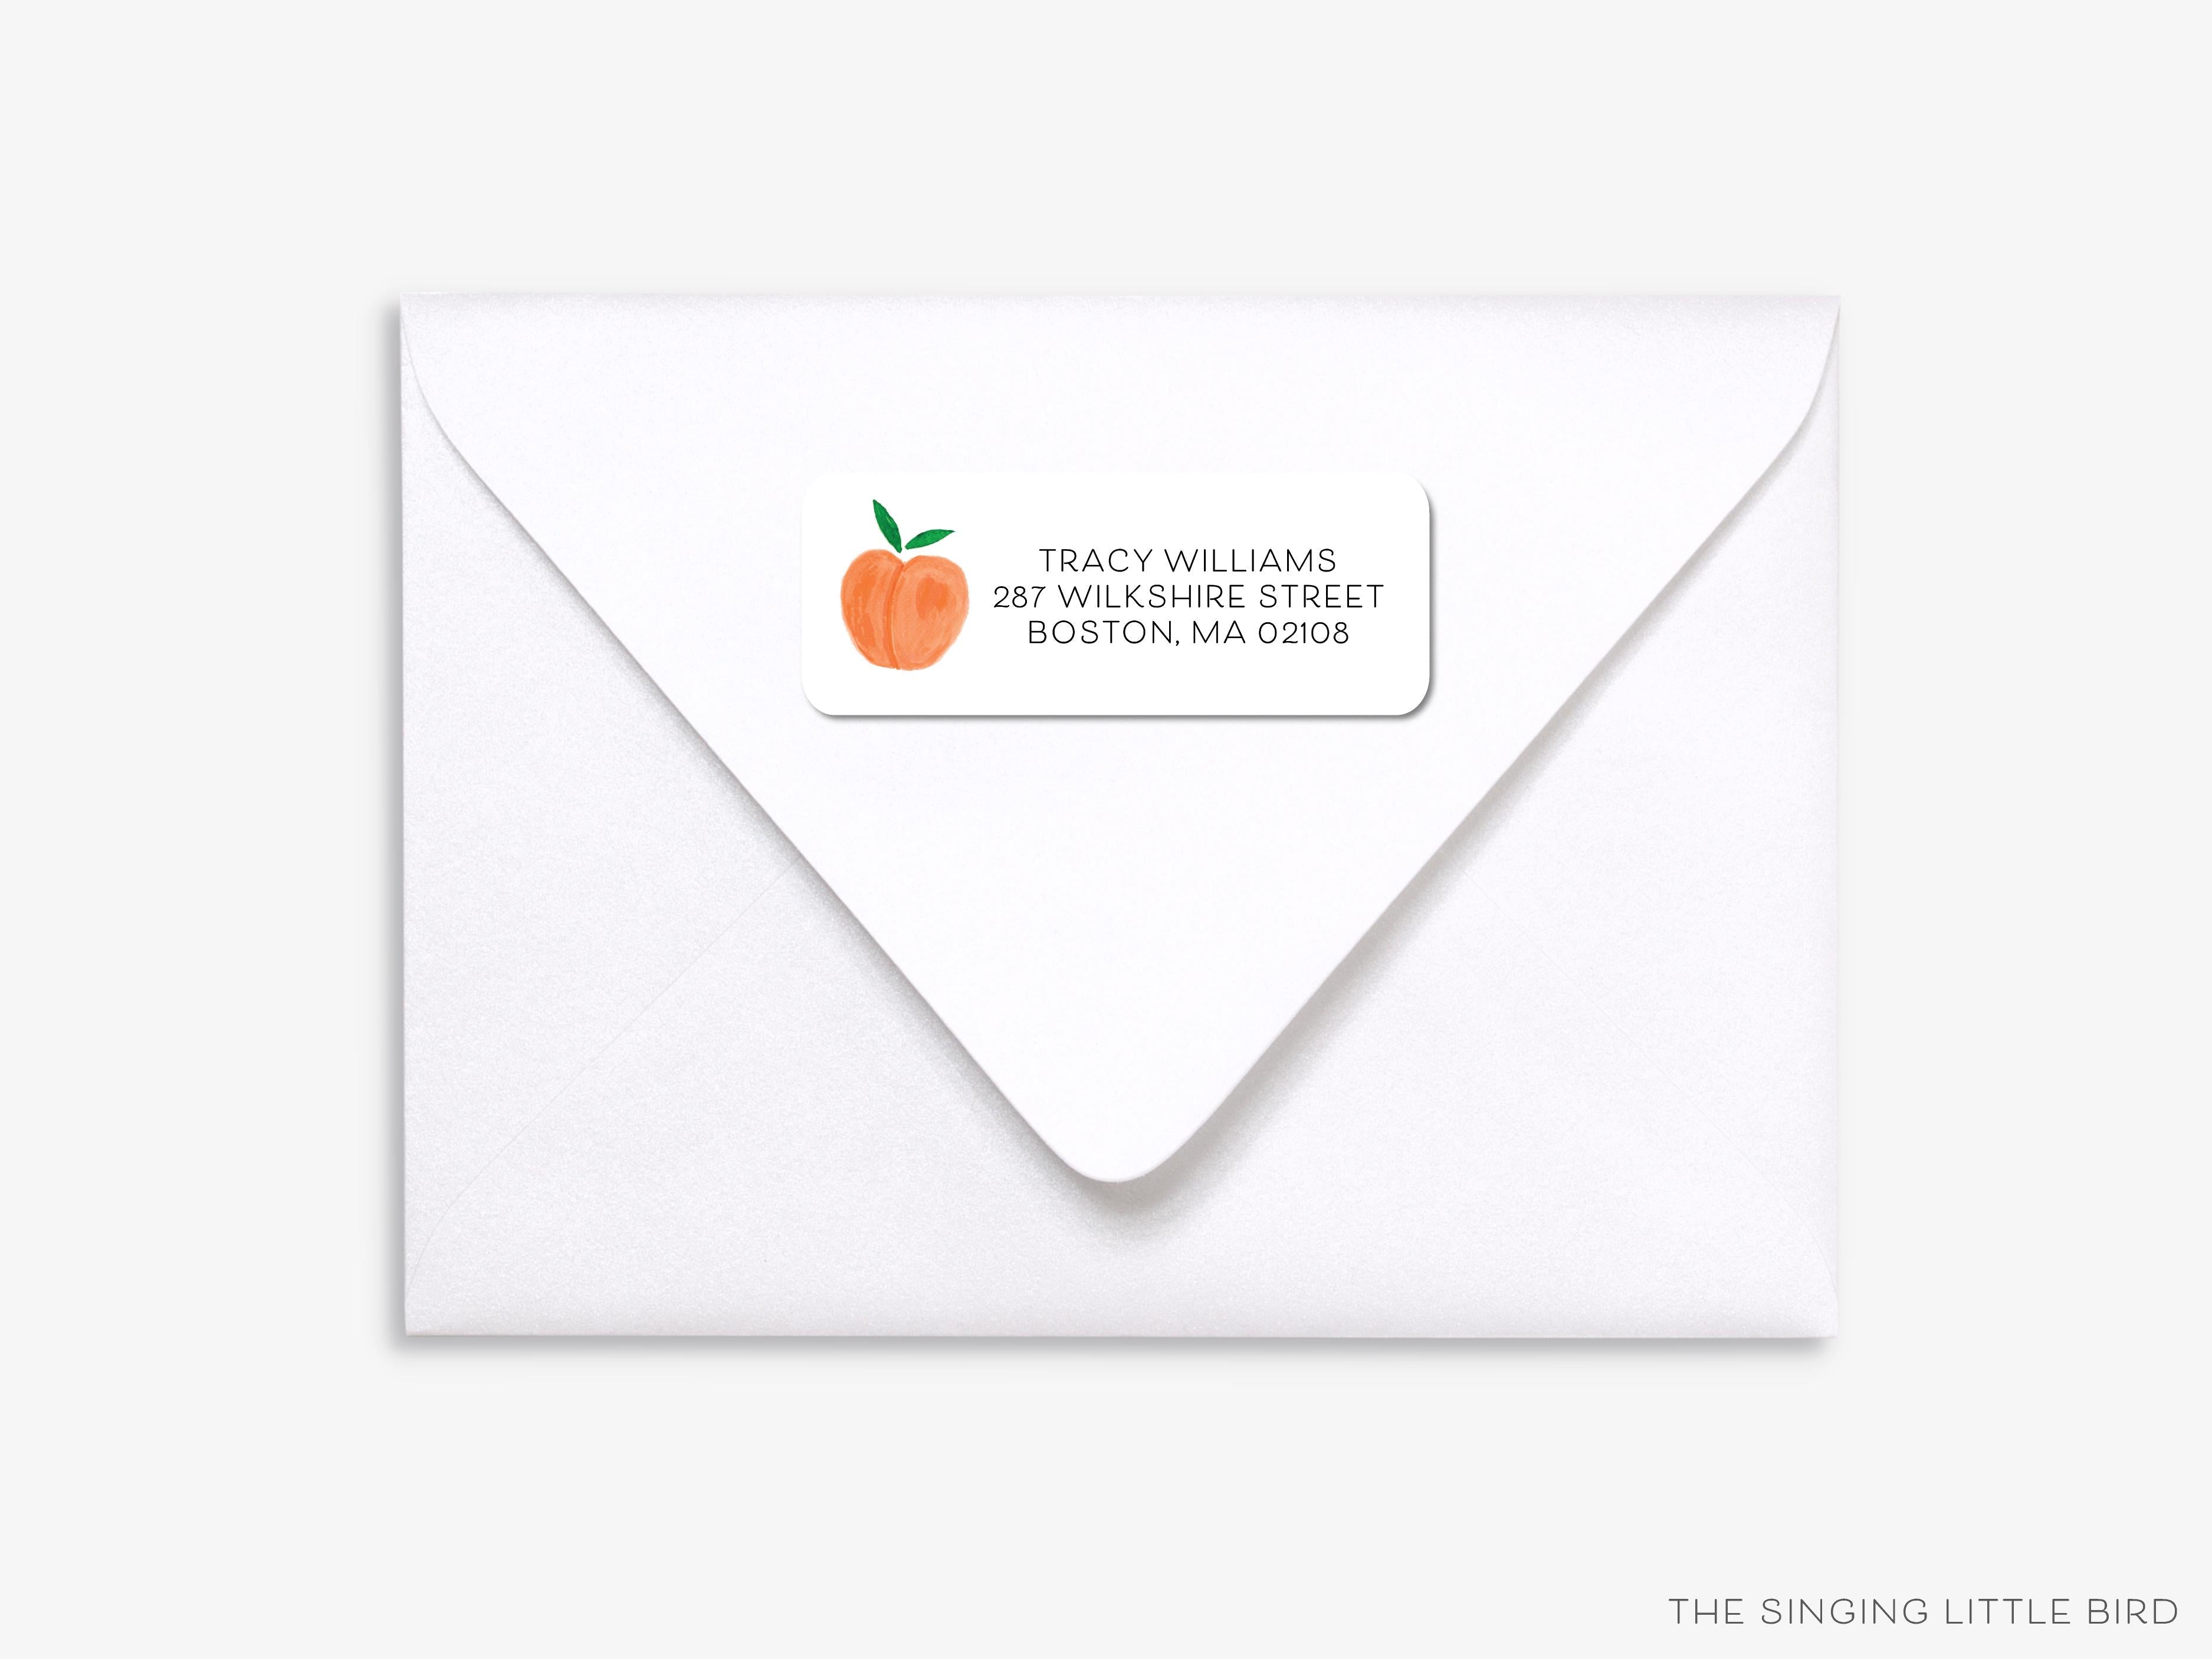 Peach Return Address Labels-These personalized return address labels are 2.625" x 1" and feature our hand-painted watercolor Peach, printed in the USA on beautiful matte finish labels. These make great gifts for yourself or the fruit lover.-The Singing Little Bird